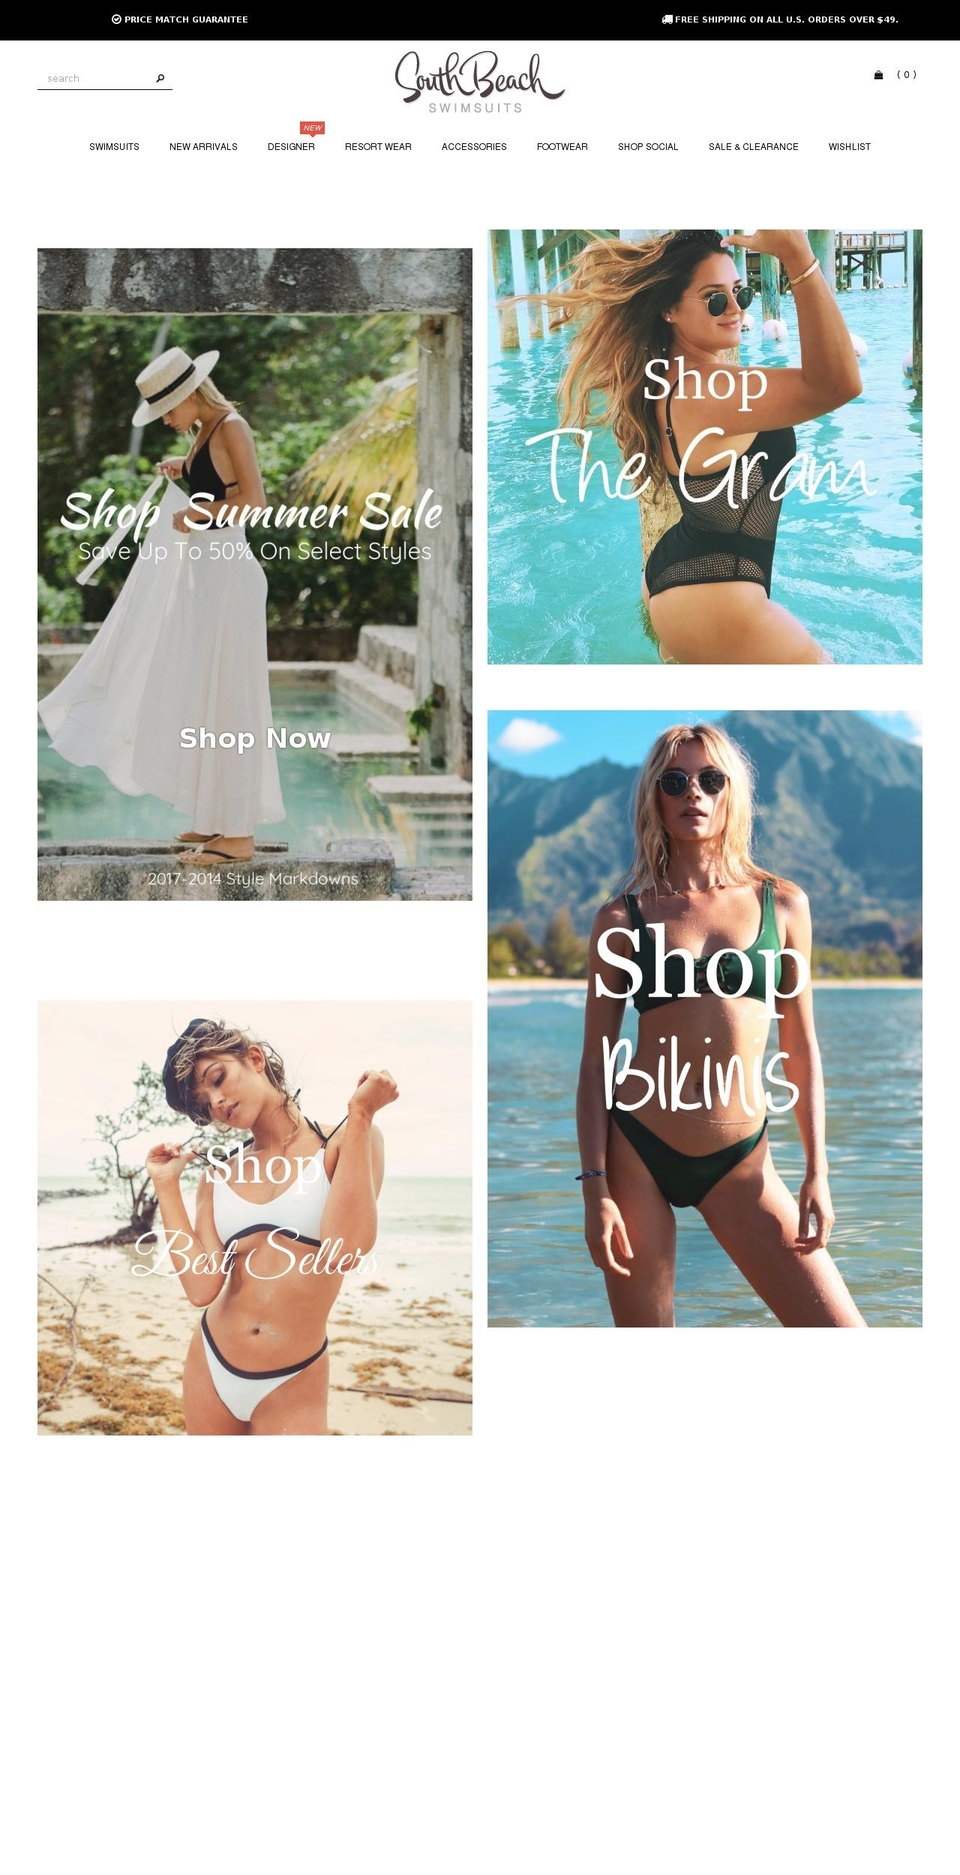 Made With ❤ By Minion Made - Updated Checkout Shopify theme site example mollybrownswimwear.net